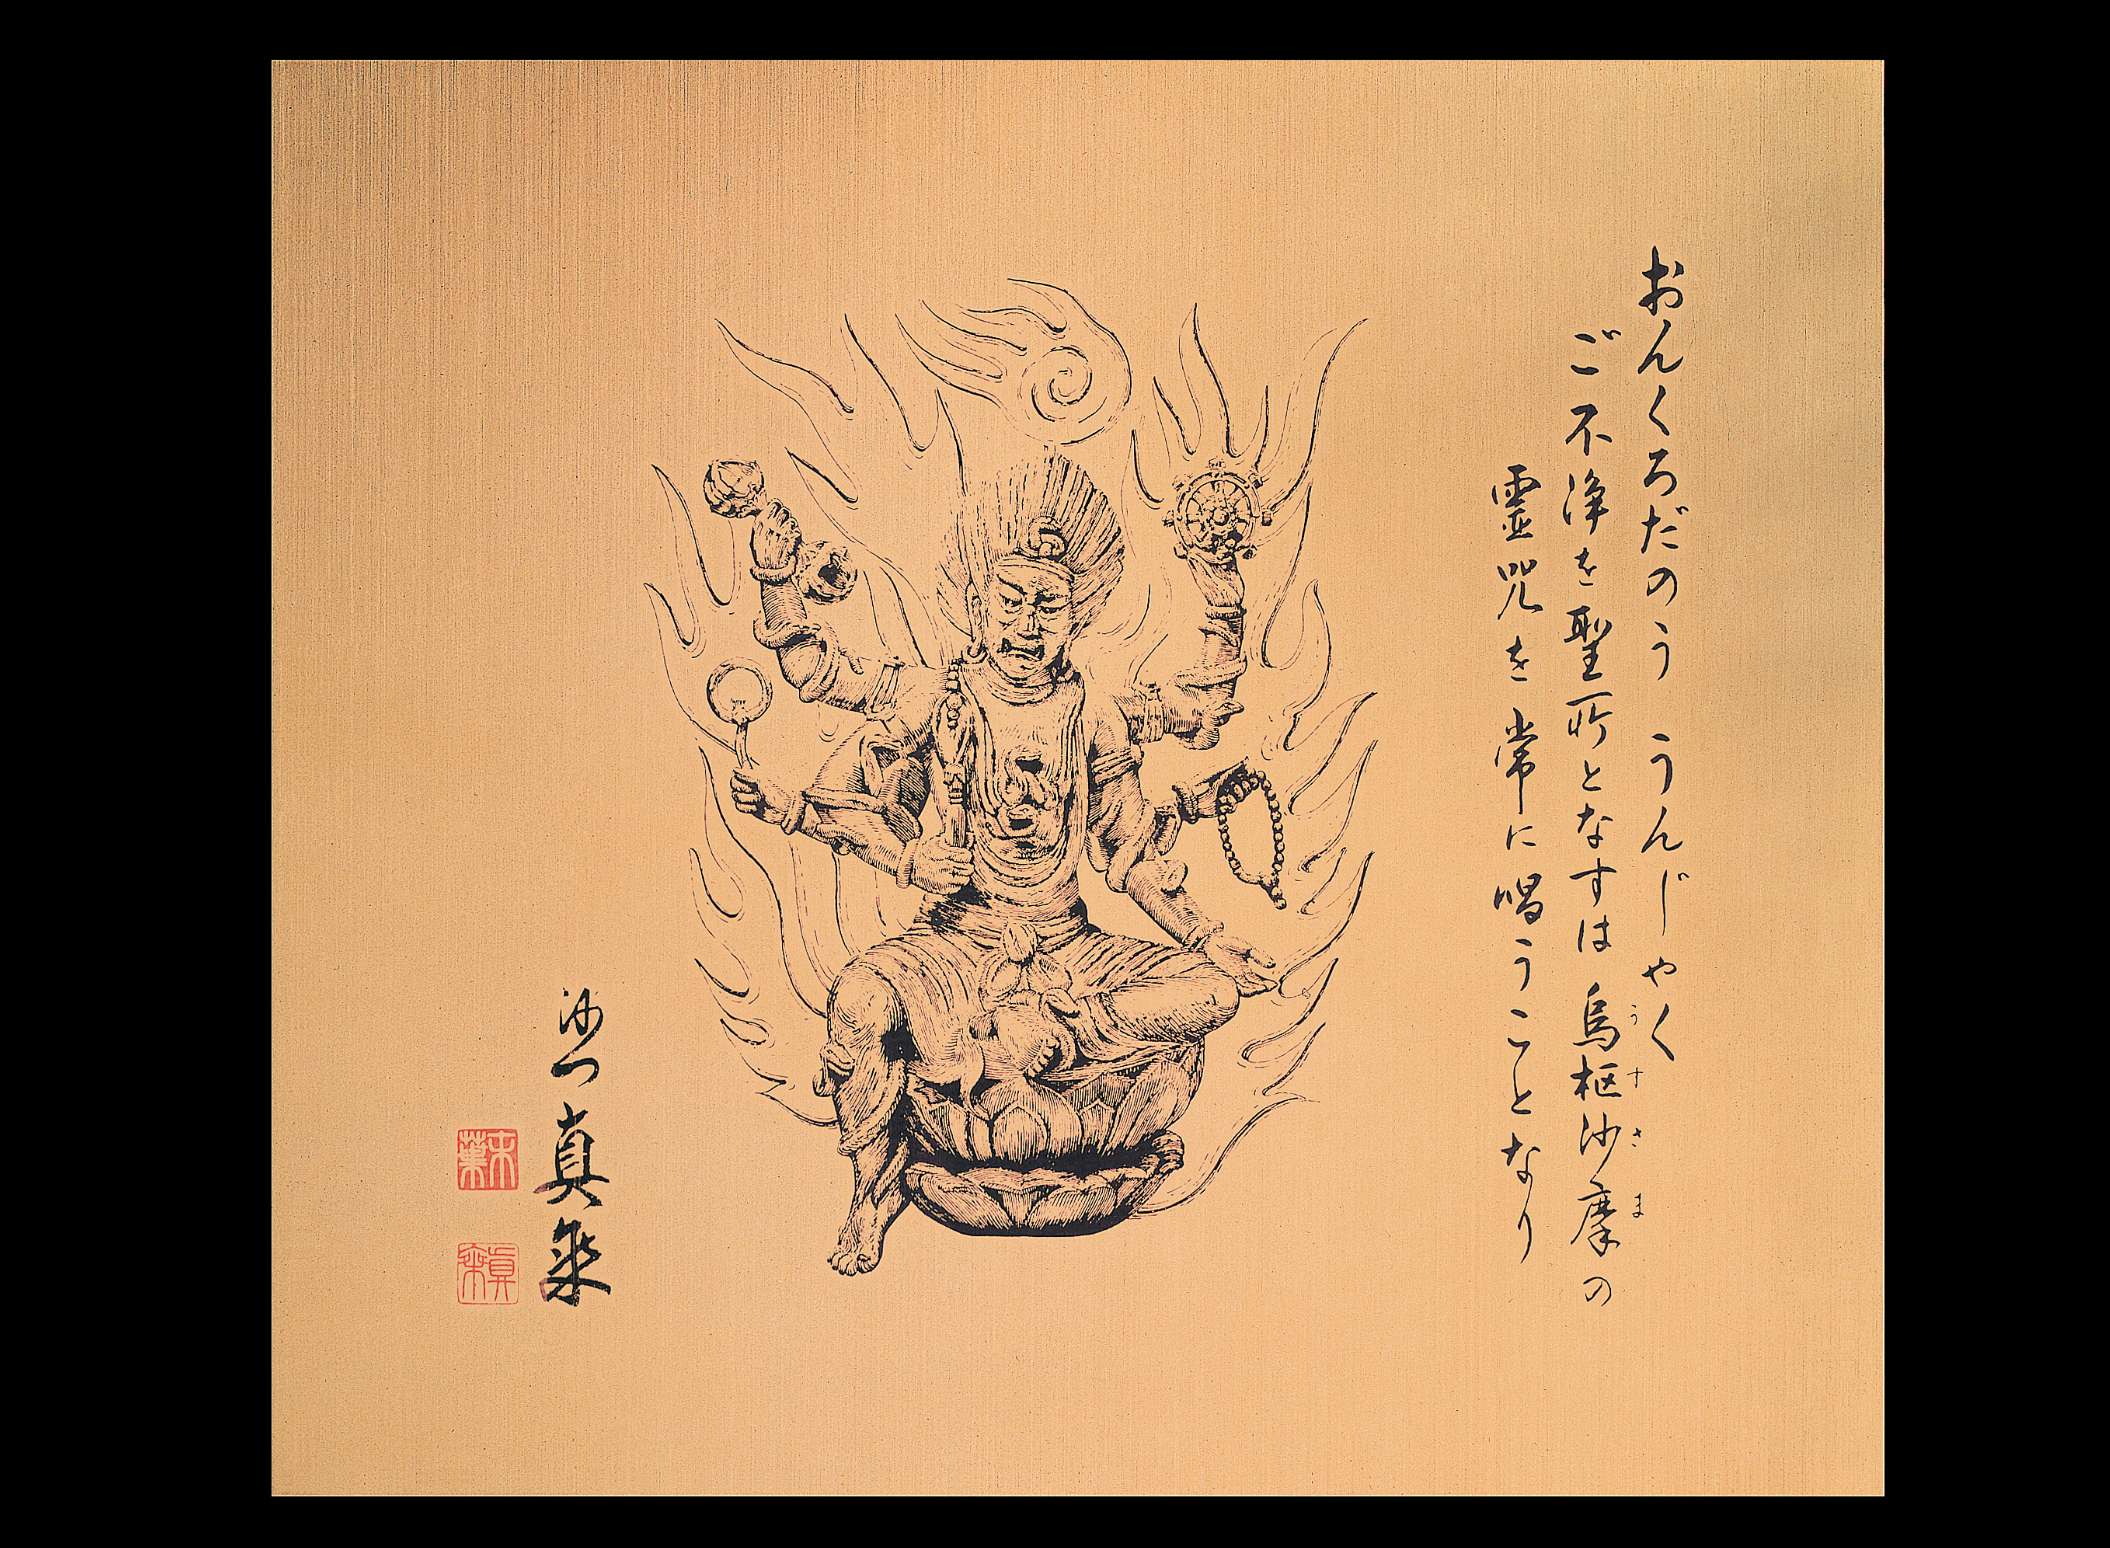 An etched drawing of a wrathful looking six-armed deity seated on a lotus, each hand wielding different implements, surrounded by flames, and framed by vertical lines of Japanese writing.